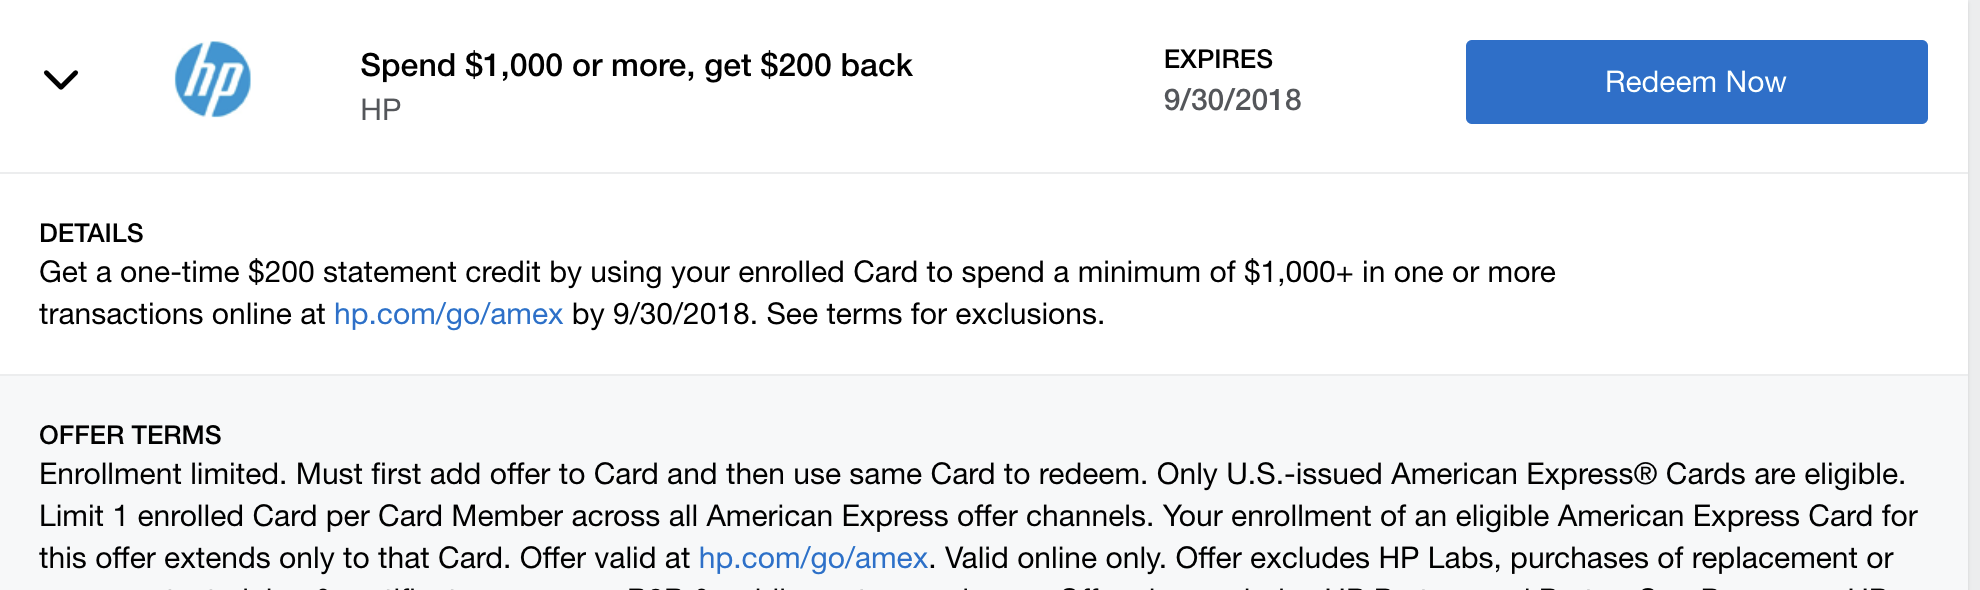 New HP Amex Offer, Save up to 20%